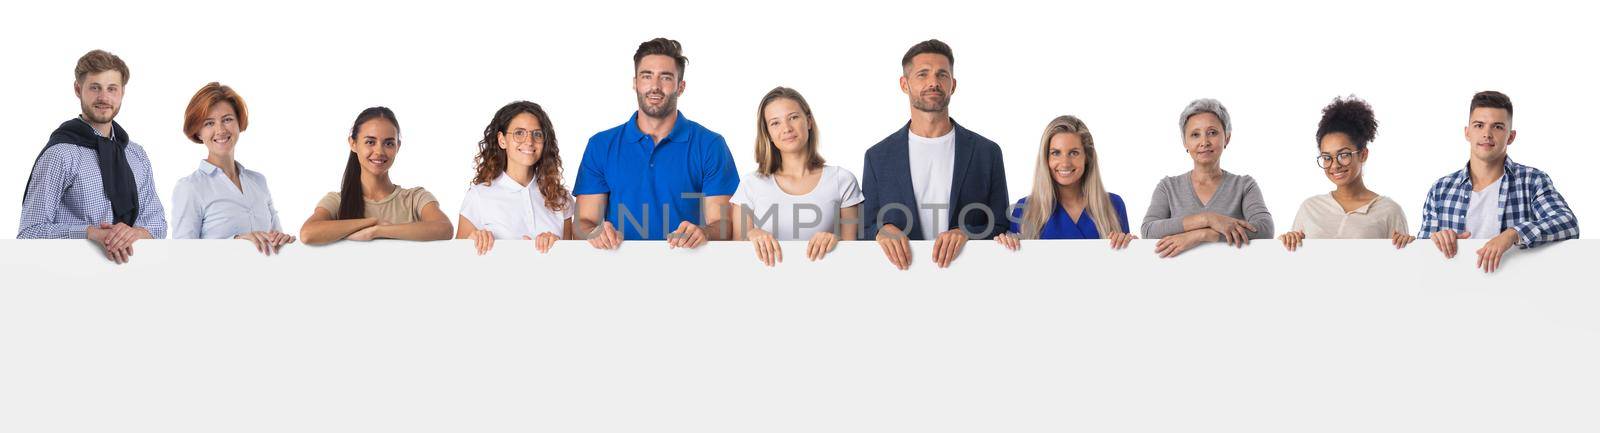 Large group of diverse people holding together blank sign with copy space for text